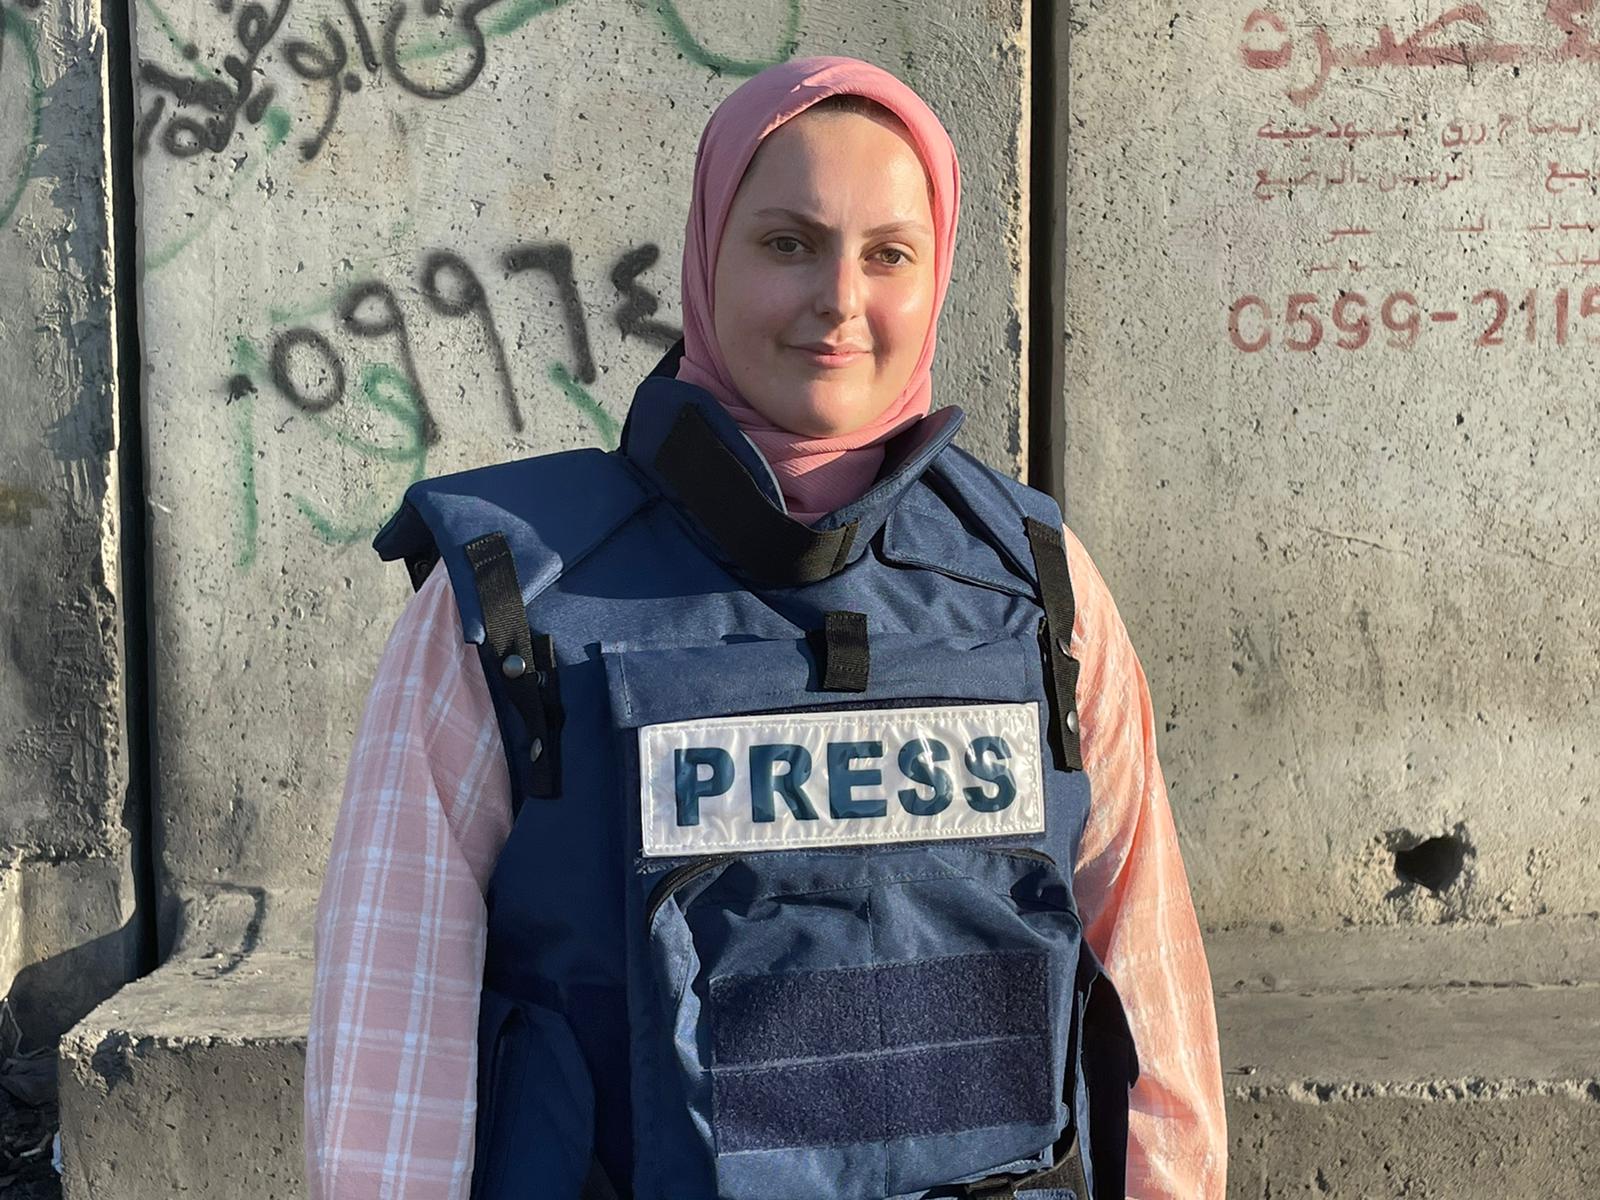 <p>Twenty-year-old trainee journalist Razan is one of 25 male and female journalists and media students who benefited from a gender awareness and sensitivity training by UNODC through the HAYA Joint Programme funded by the Government of Canada. Photo © Razan Odeh.</p>